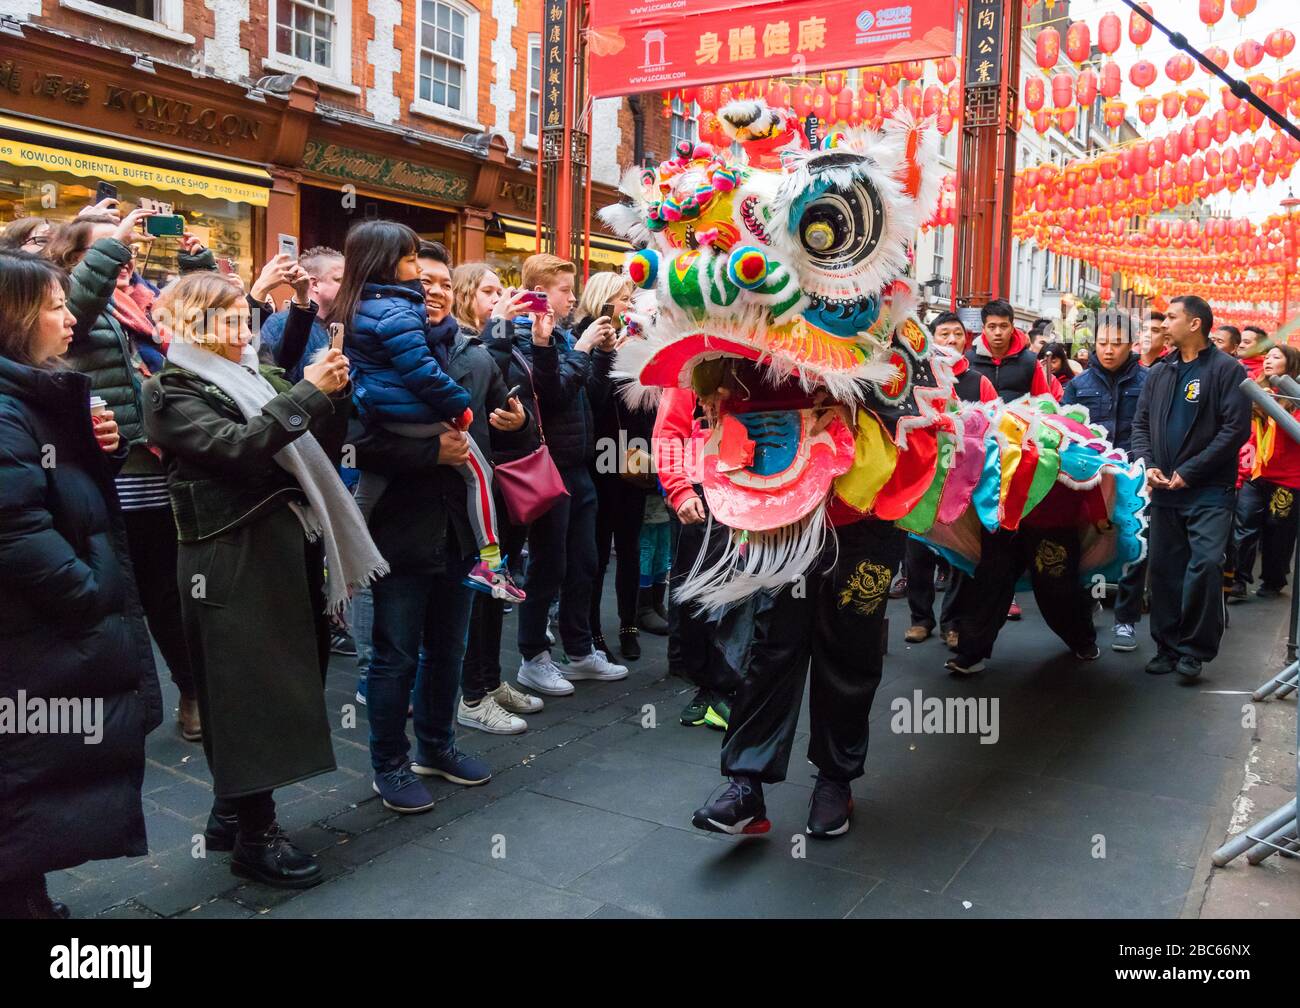 Chinese Lion / Dragon dance at 2020 new year celebrations in Chinatown, London. Stock Photo